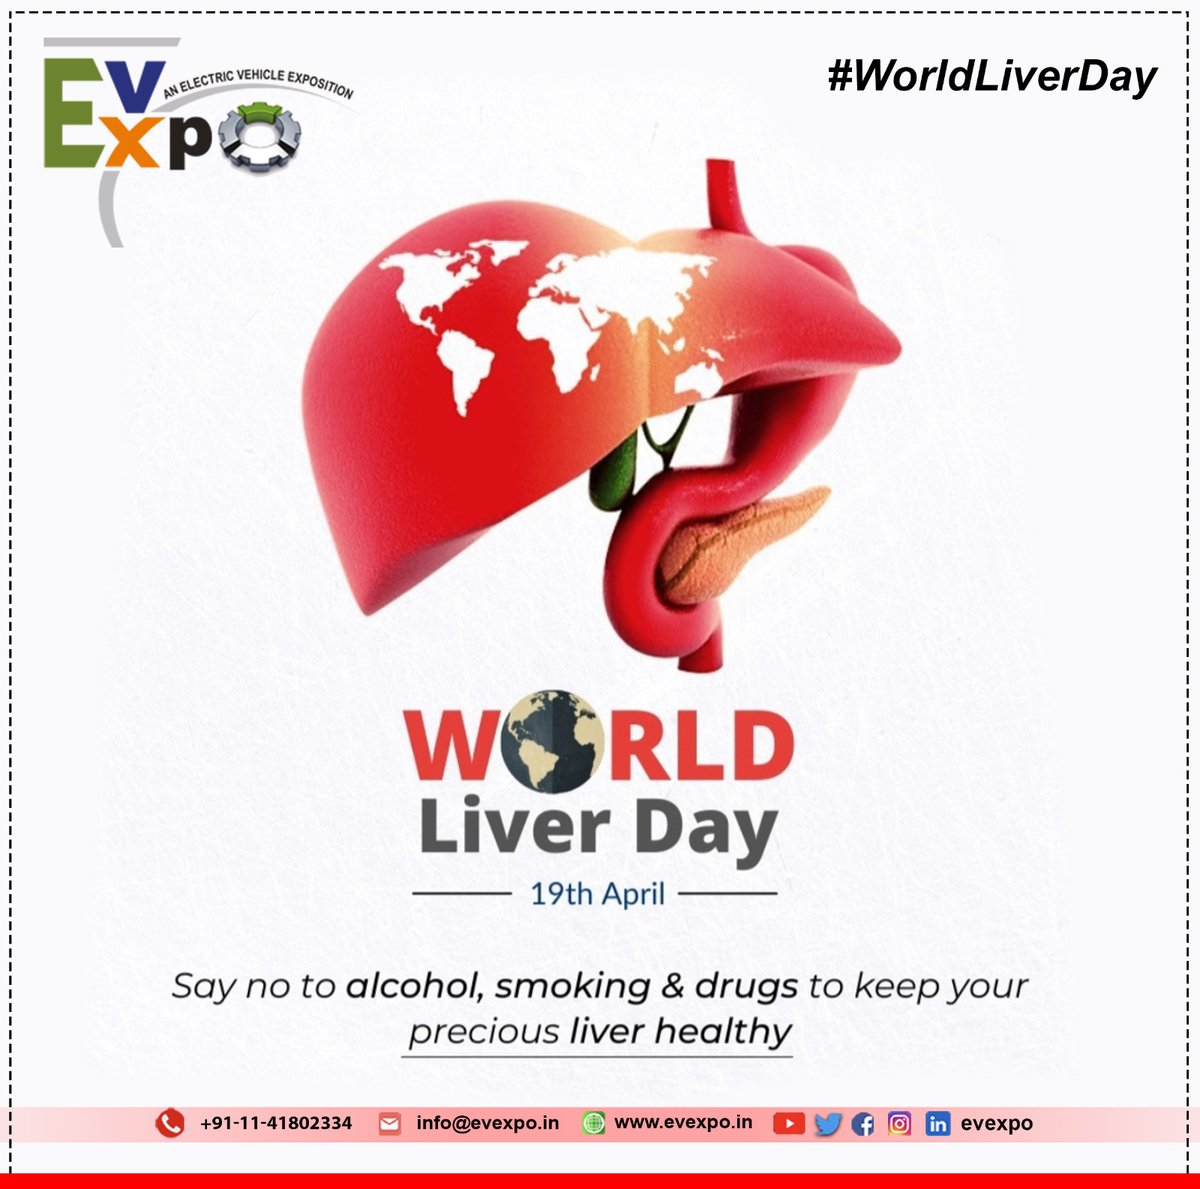 'Happy World Liver Day! 🌟 At EvExpo, we're not just about electric vehicles, but also promoting health and wellness. #worldliverday #healthyliving #evexpo #healthyeating #noalcohol #lifechanging #importanceofliver #electricvehiclesarethefuture #sustainablefuture